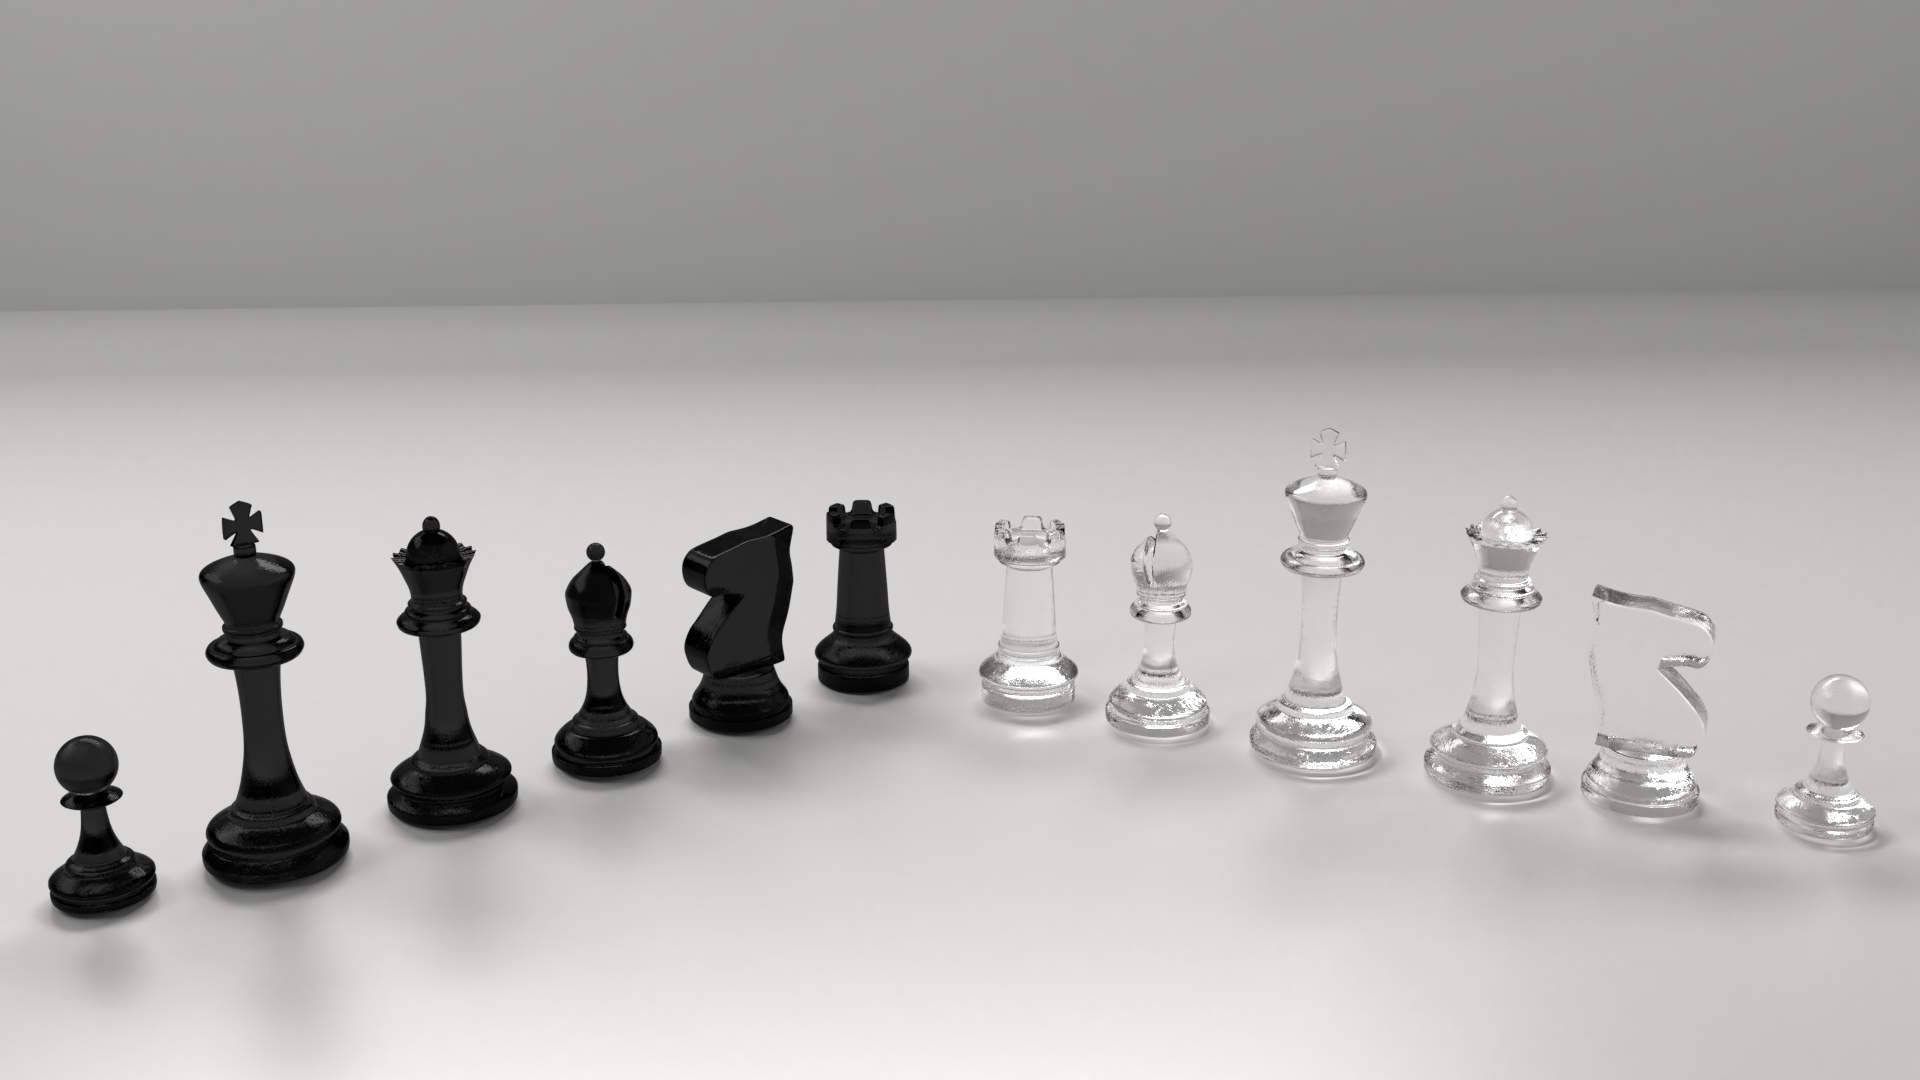 Minimalistic Clear Chess Pieces